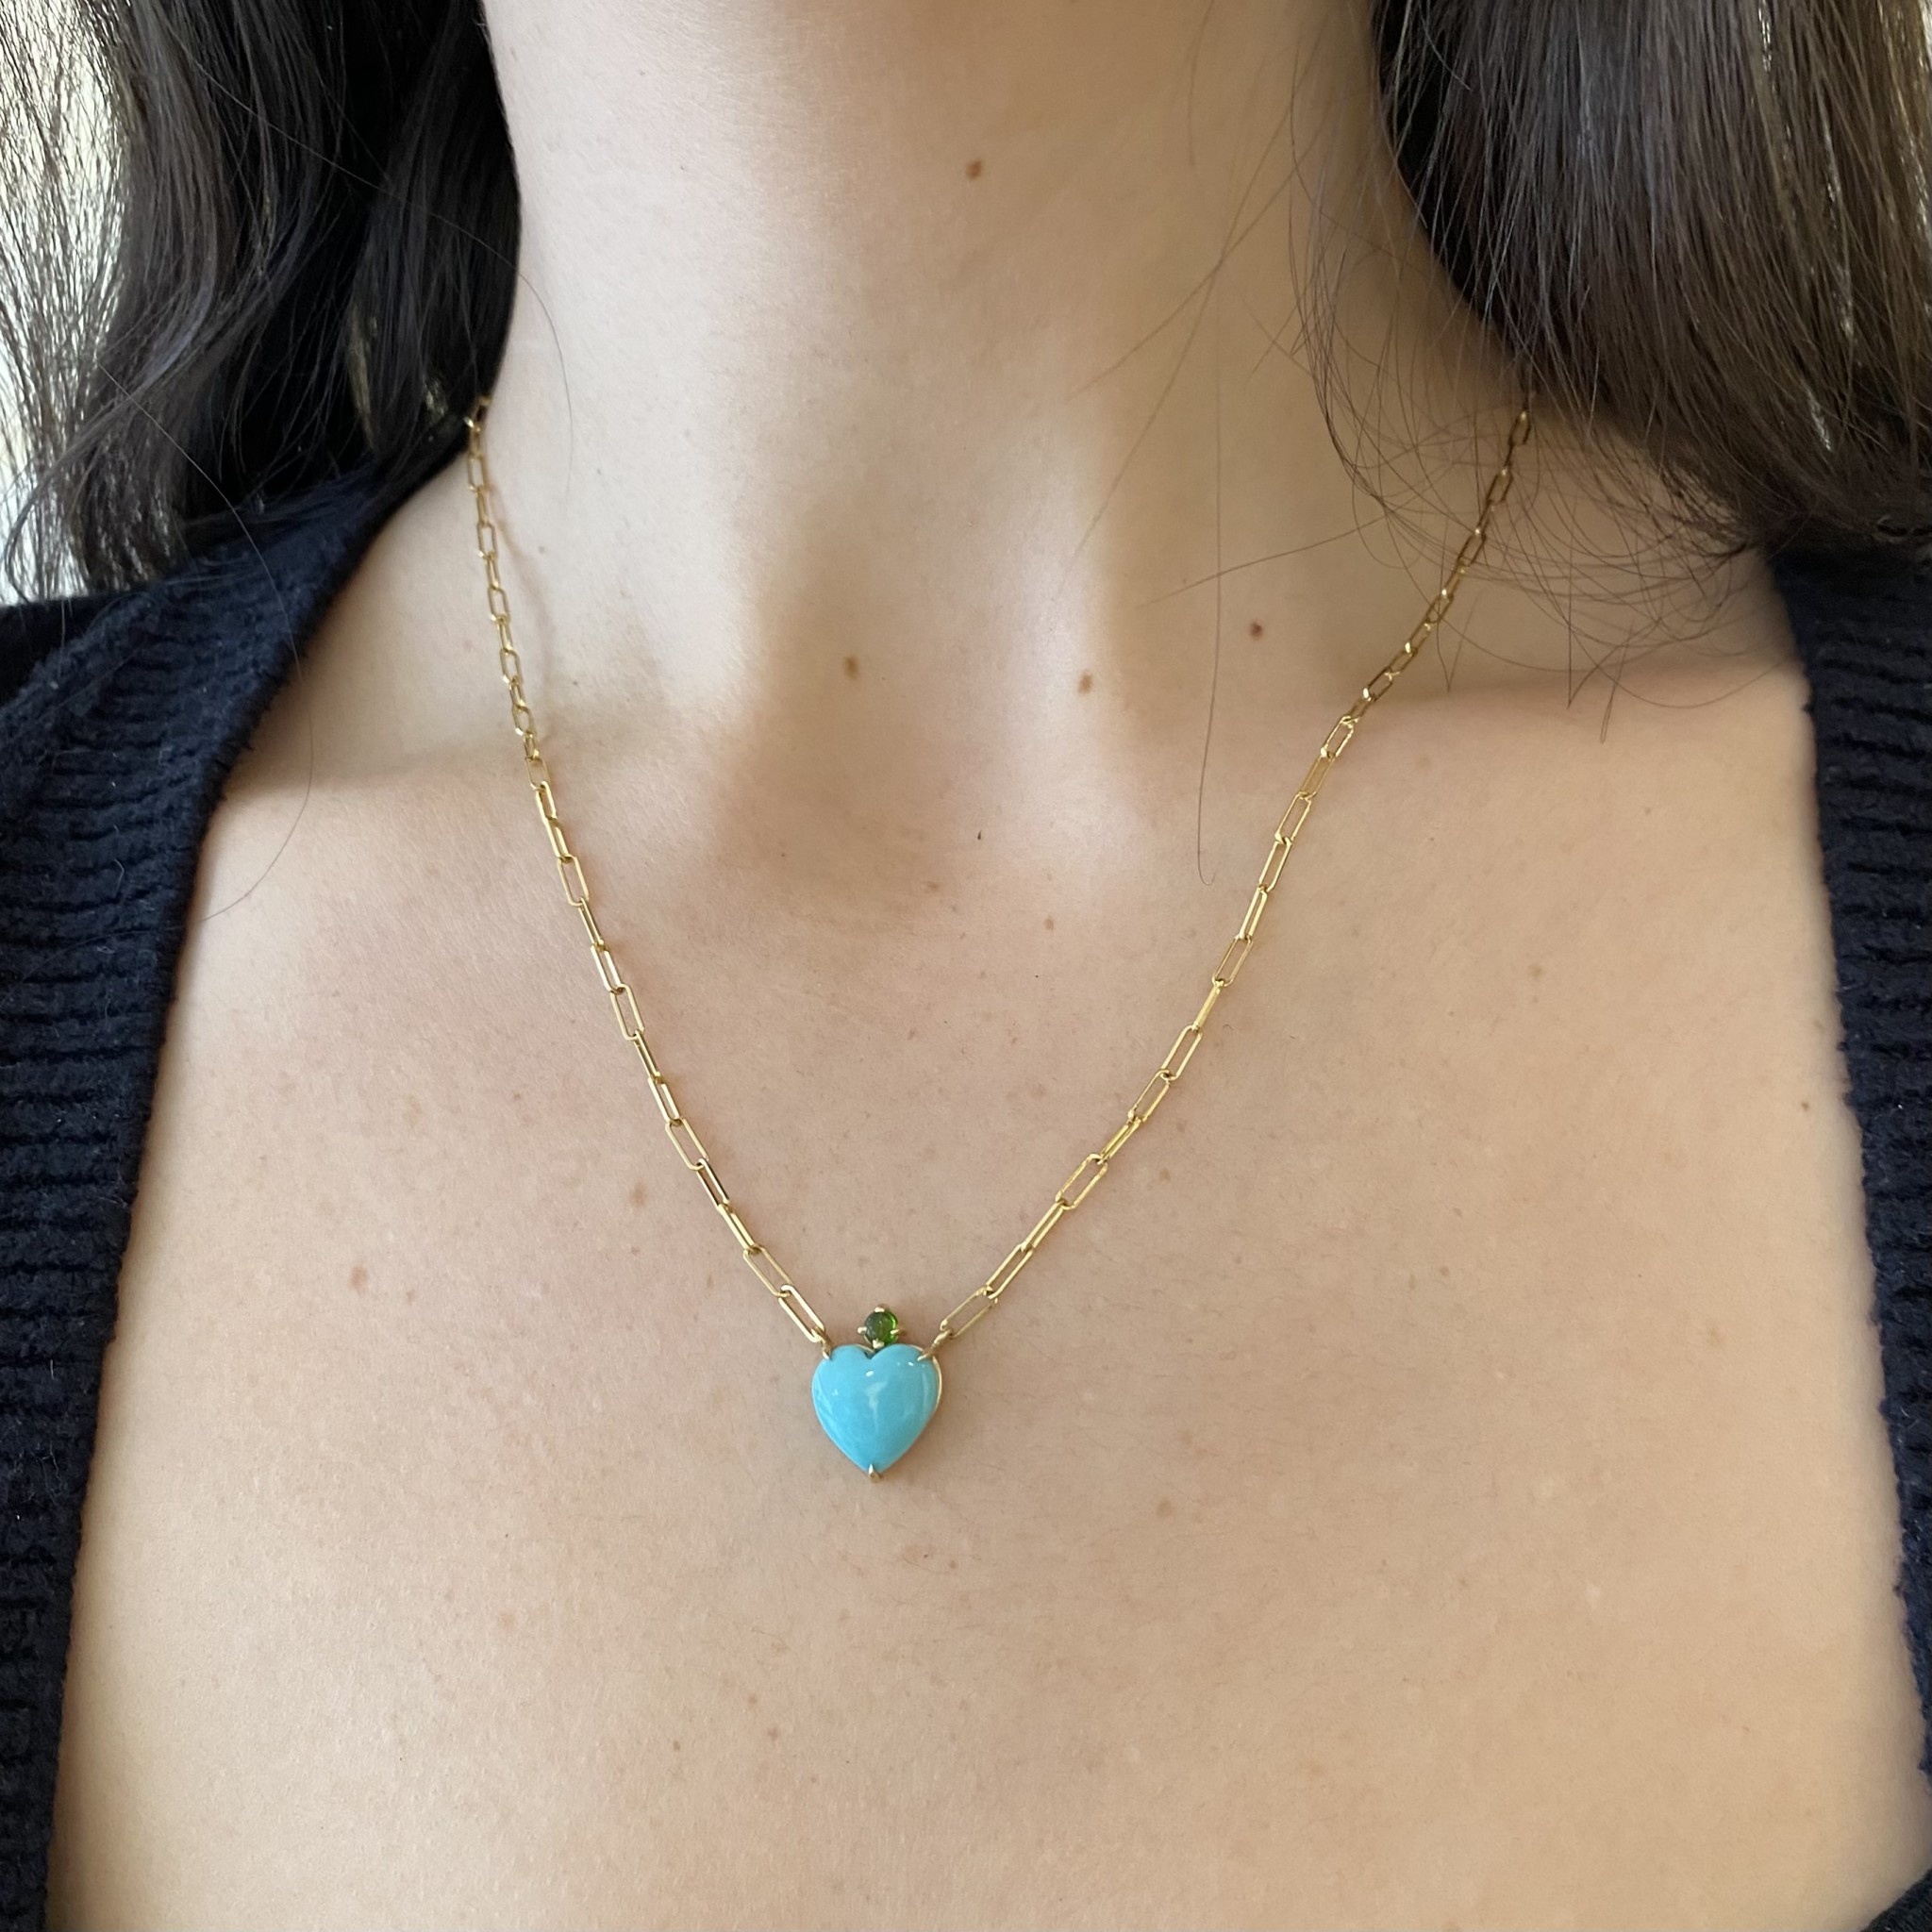 Single Turquoise Heart Gemfetti Necklace - Element 79 Contemporary Jewelry